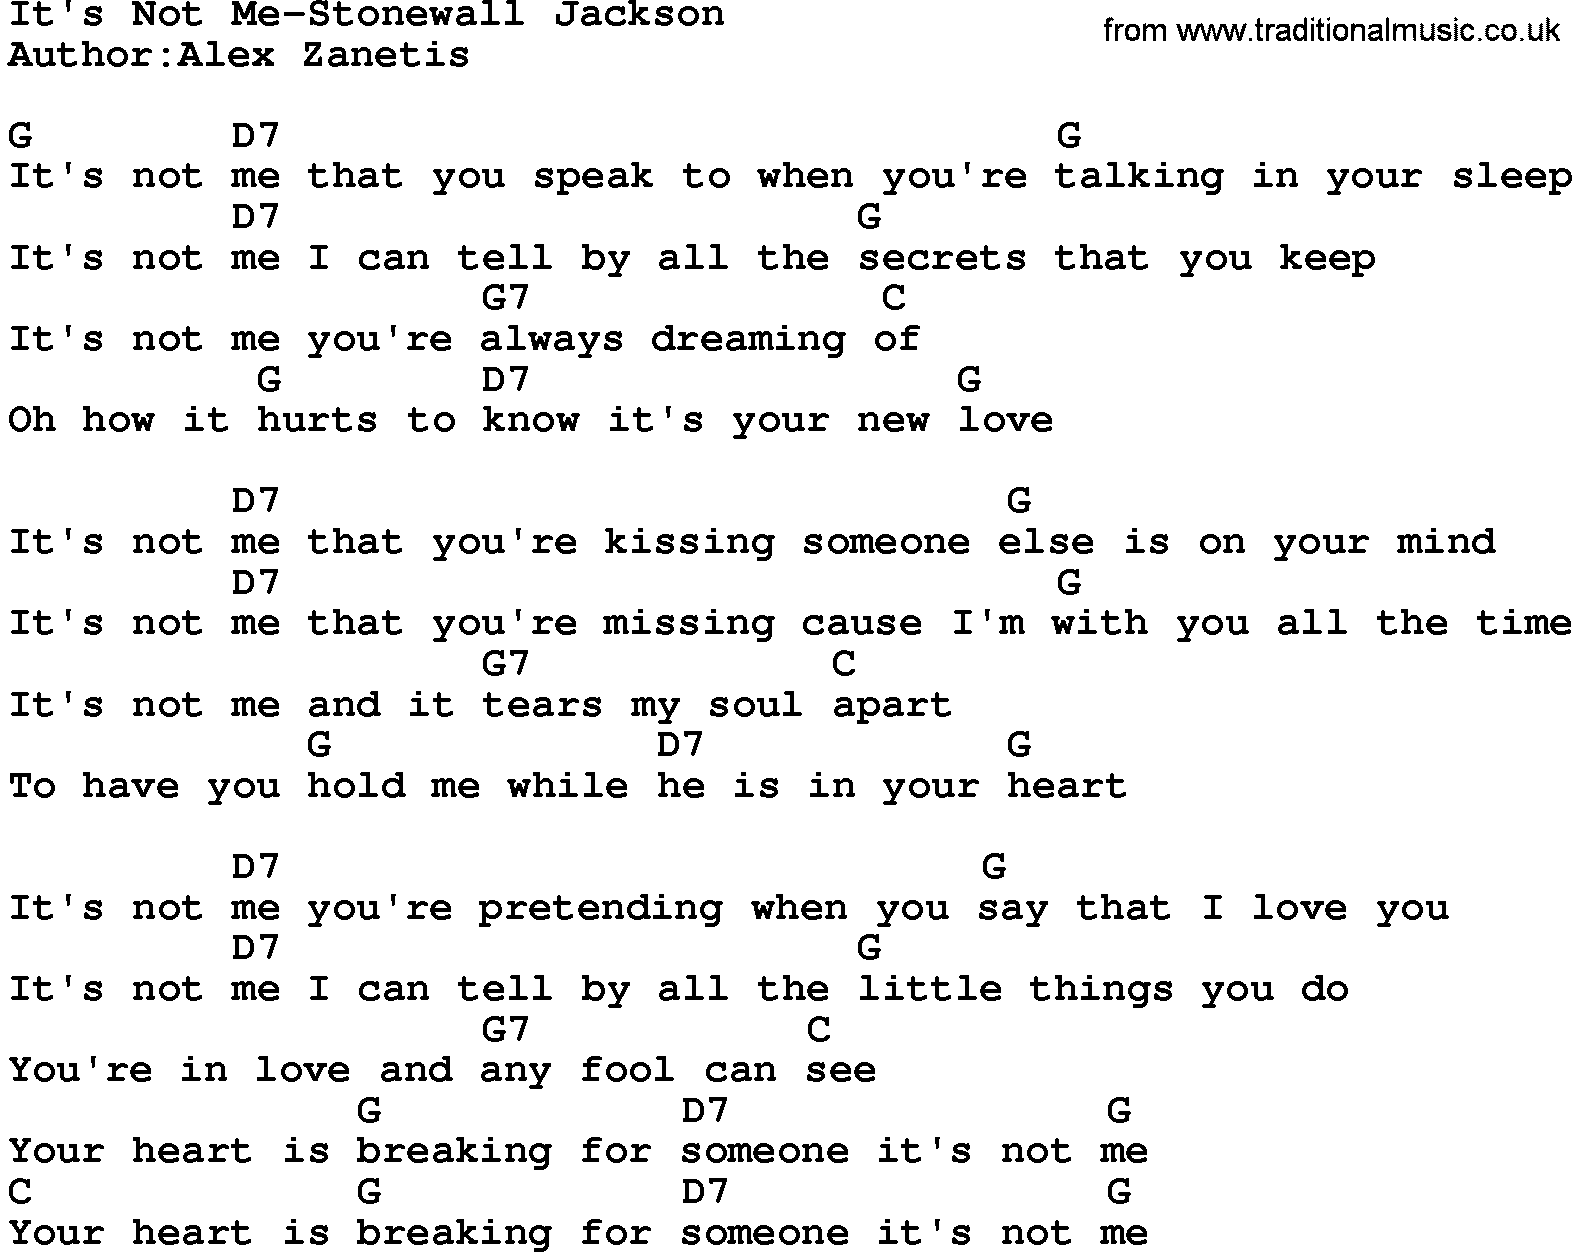 Country music song: It's Not Me-Stonewall Jackson lyrics and chords